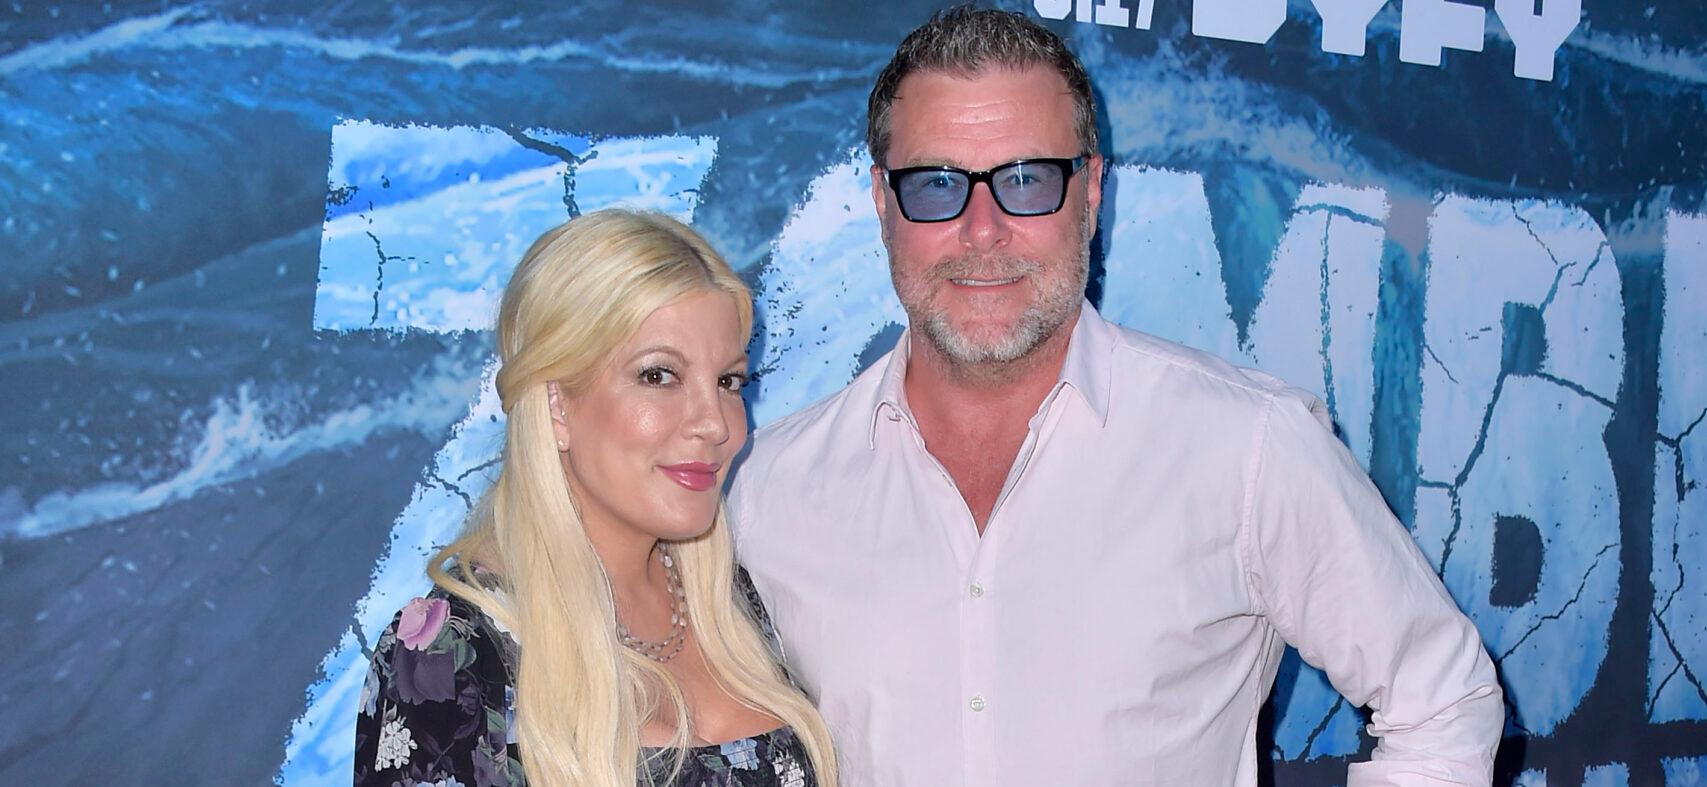 Tori Spelling and Dean McDermott atremiere 'Zombie Tidal Wave' In Los Angeles